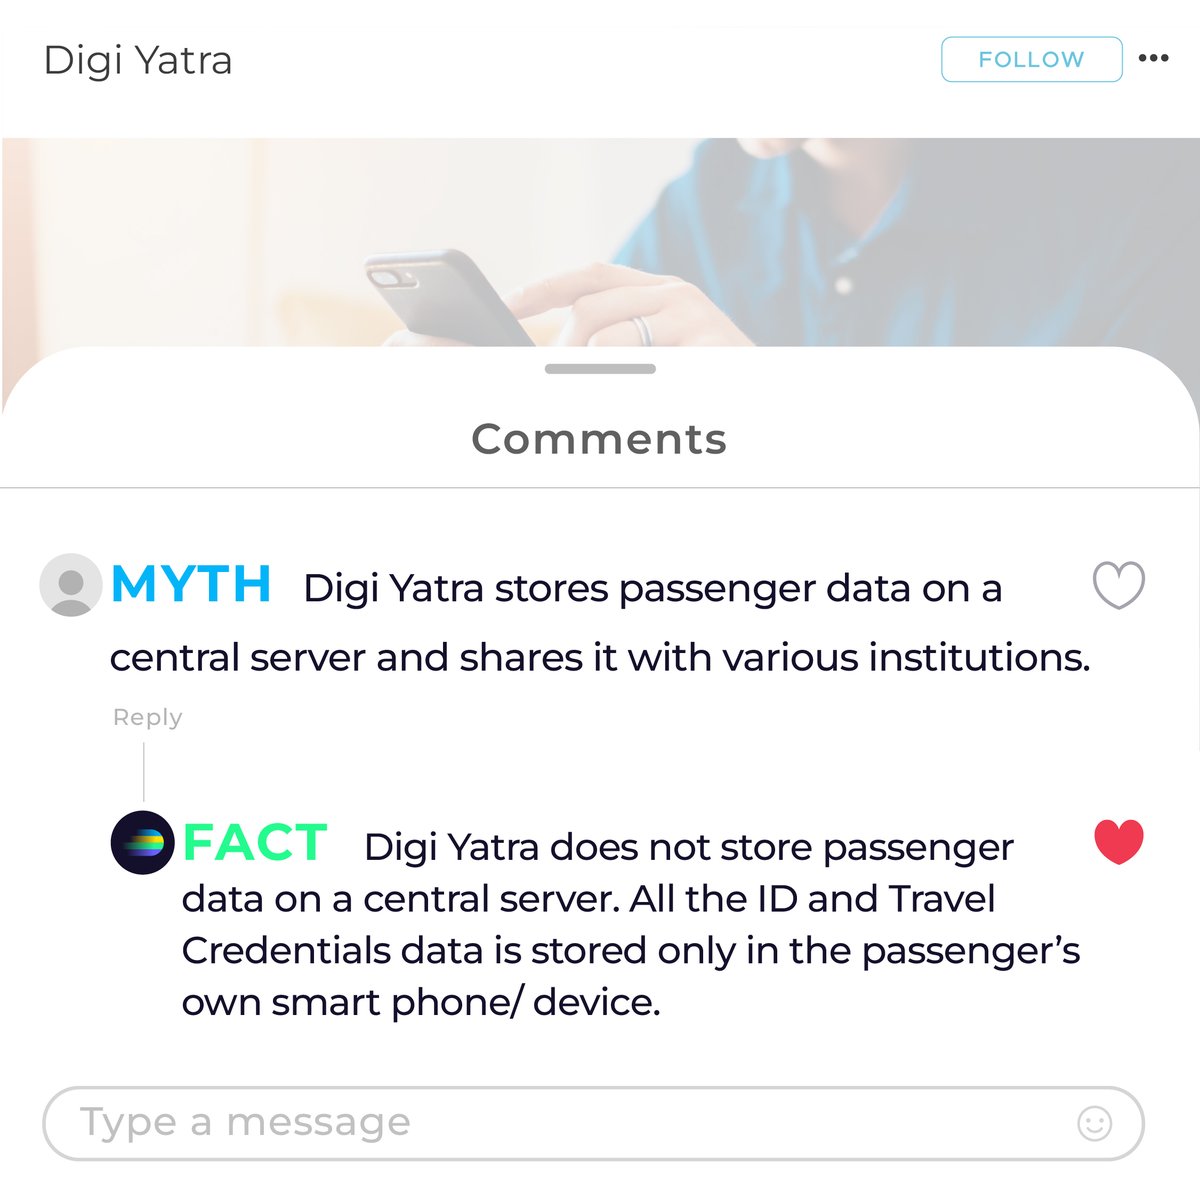 Separating myths from facts! 💡

With Digi Yatra, your data remains securely stored on your device, giving you full control. 

Stay informed, stay secure!

Download the Digi Yatra App now!
Available on IOS and Android.
#DigiYatra #MythsVsFacts #DataSecurity